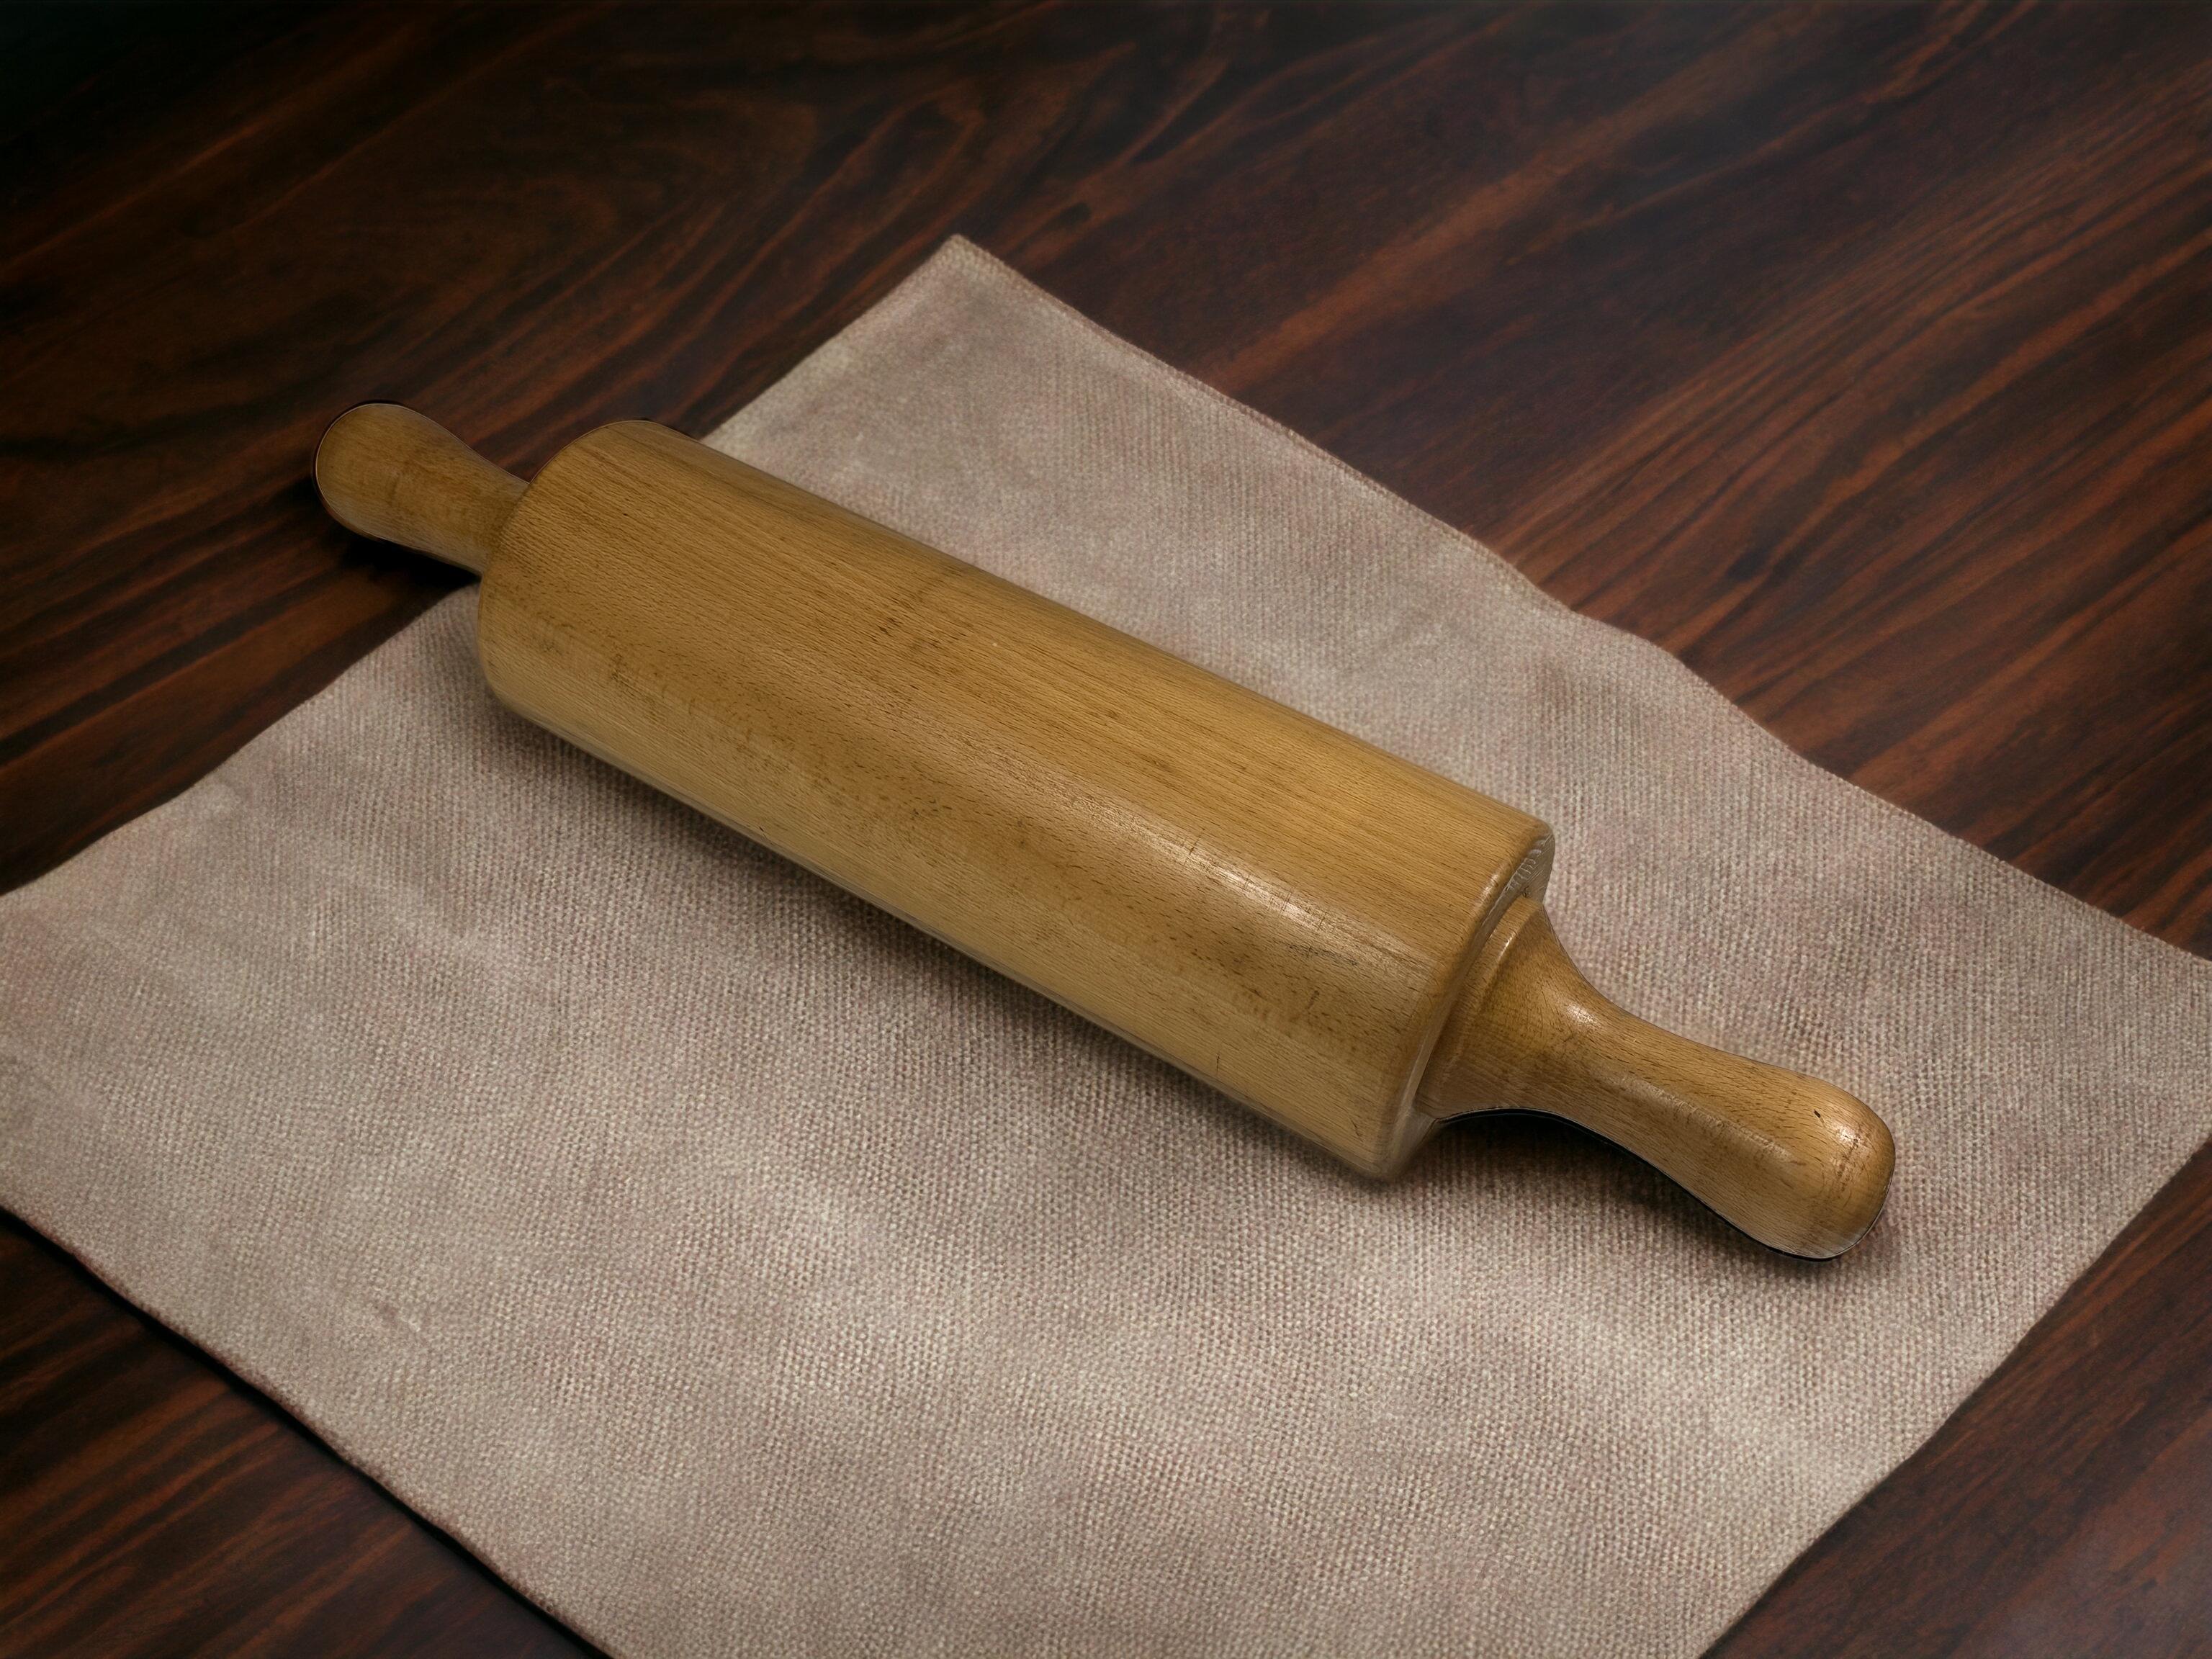 An amazing wooden rolling pin. This is a heavy bakery decoration item can also be used as a sculpture or center piece. It is in very good condition, some scratches but this is old-age. A nice addition to any room. Found at an estate sale in Vienna,